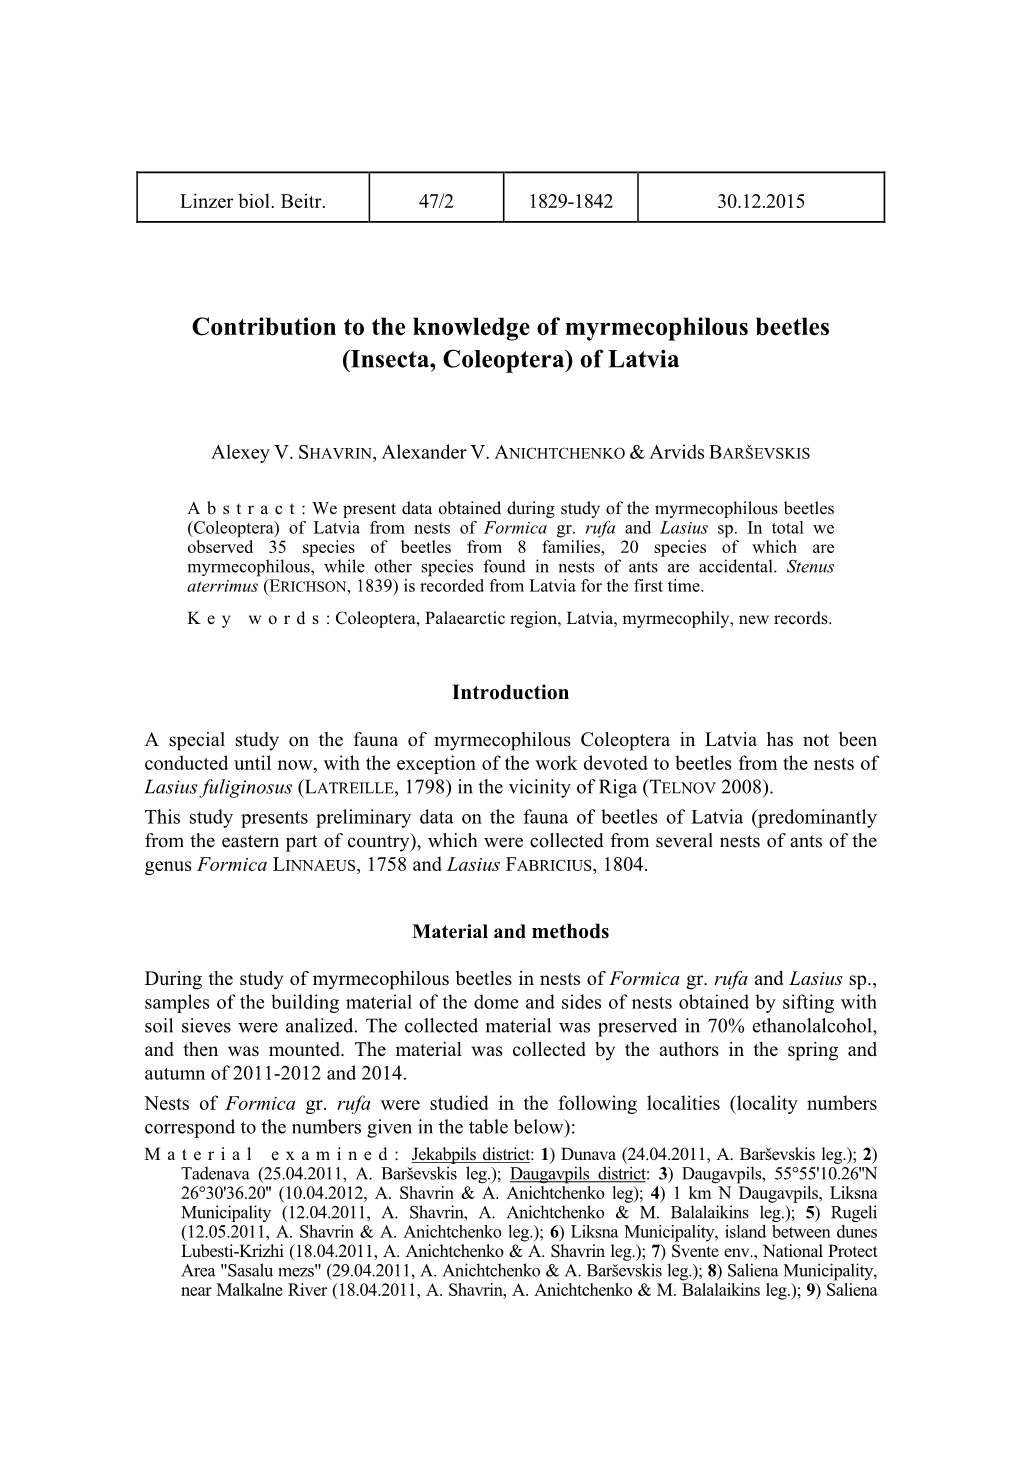 Contribution to the Knowledge of Myrmecophilous Beetles (Insecta, Coleoptera) of Latvia